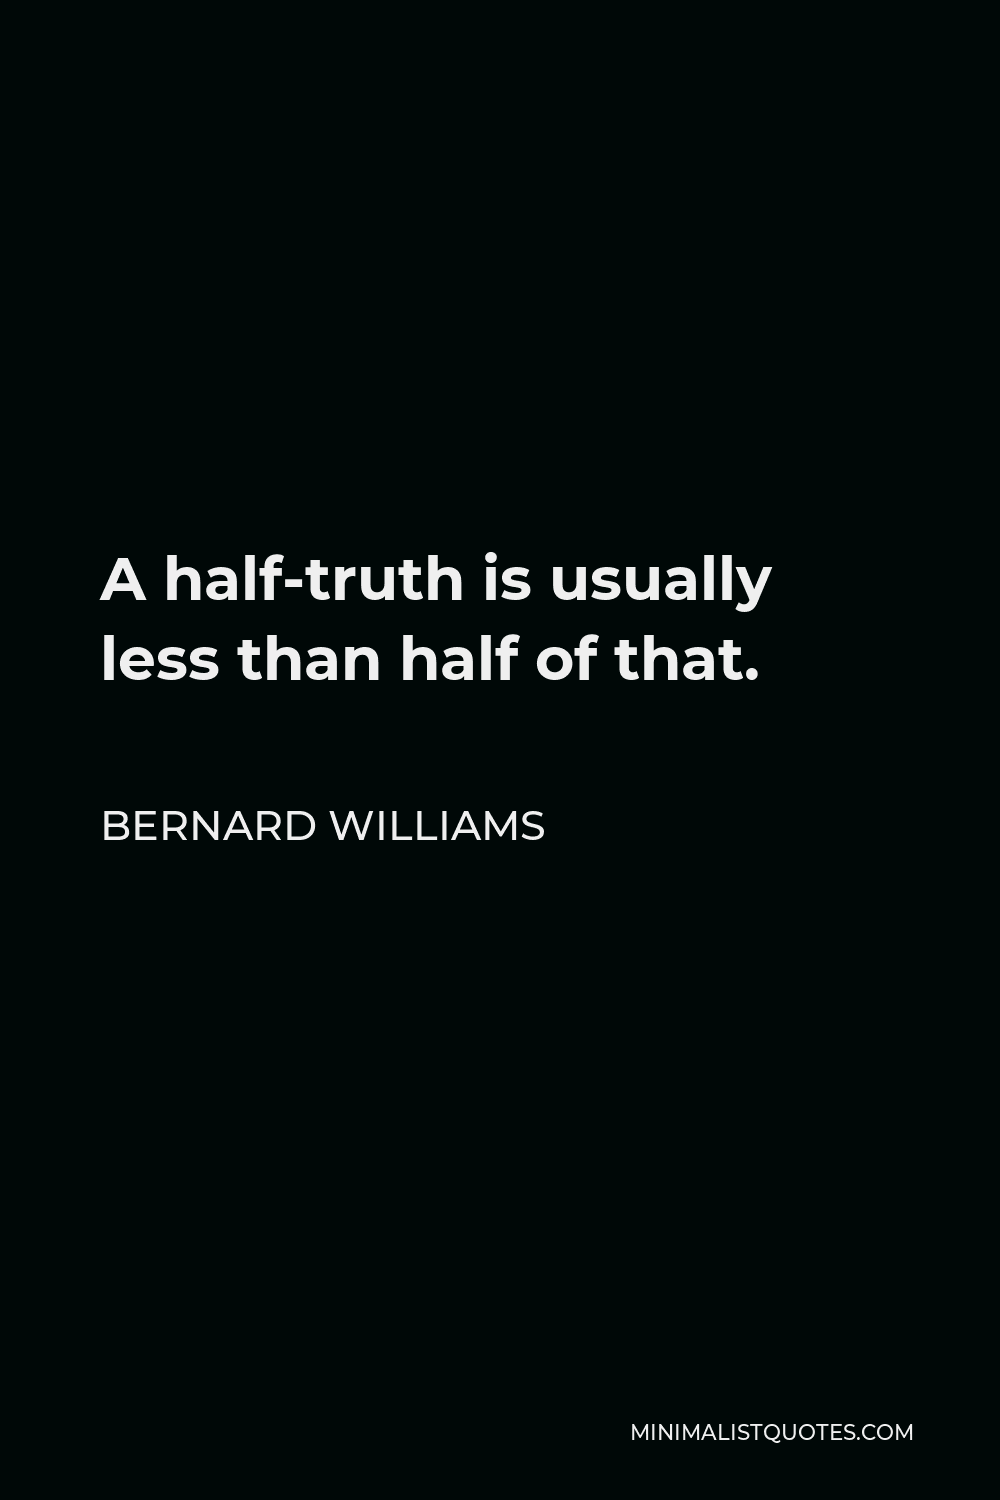 Bernard Williams Quote - A half-truth is usually less than half of that.